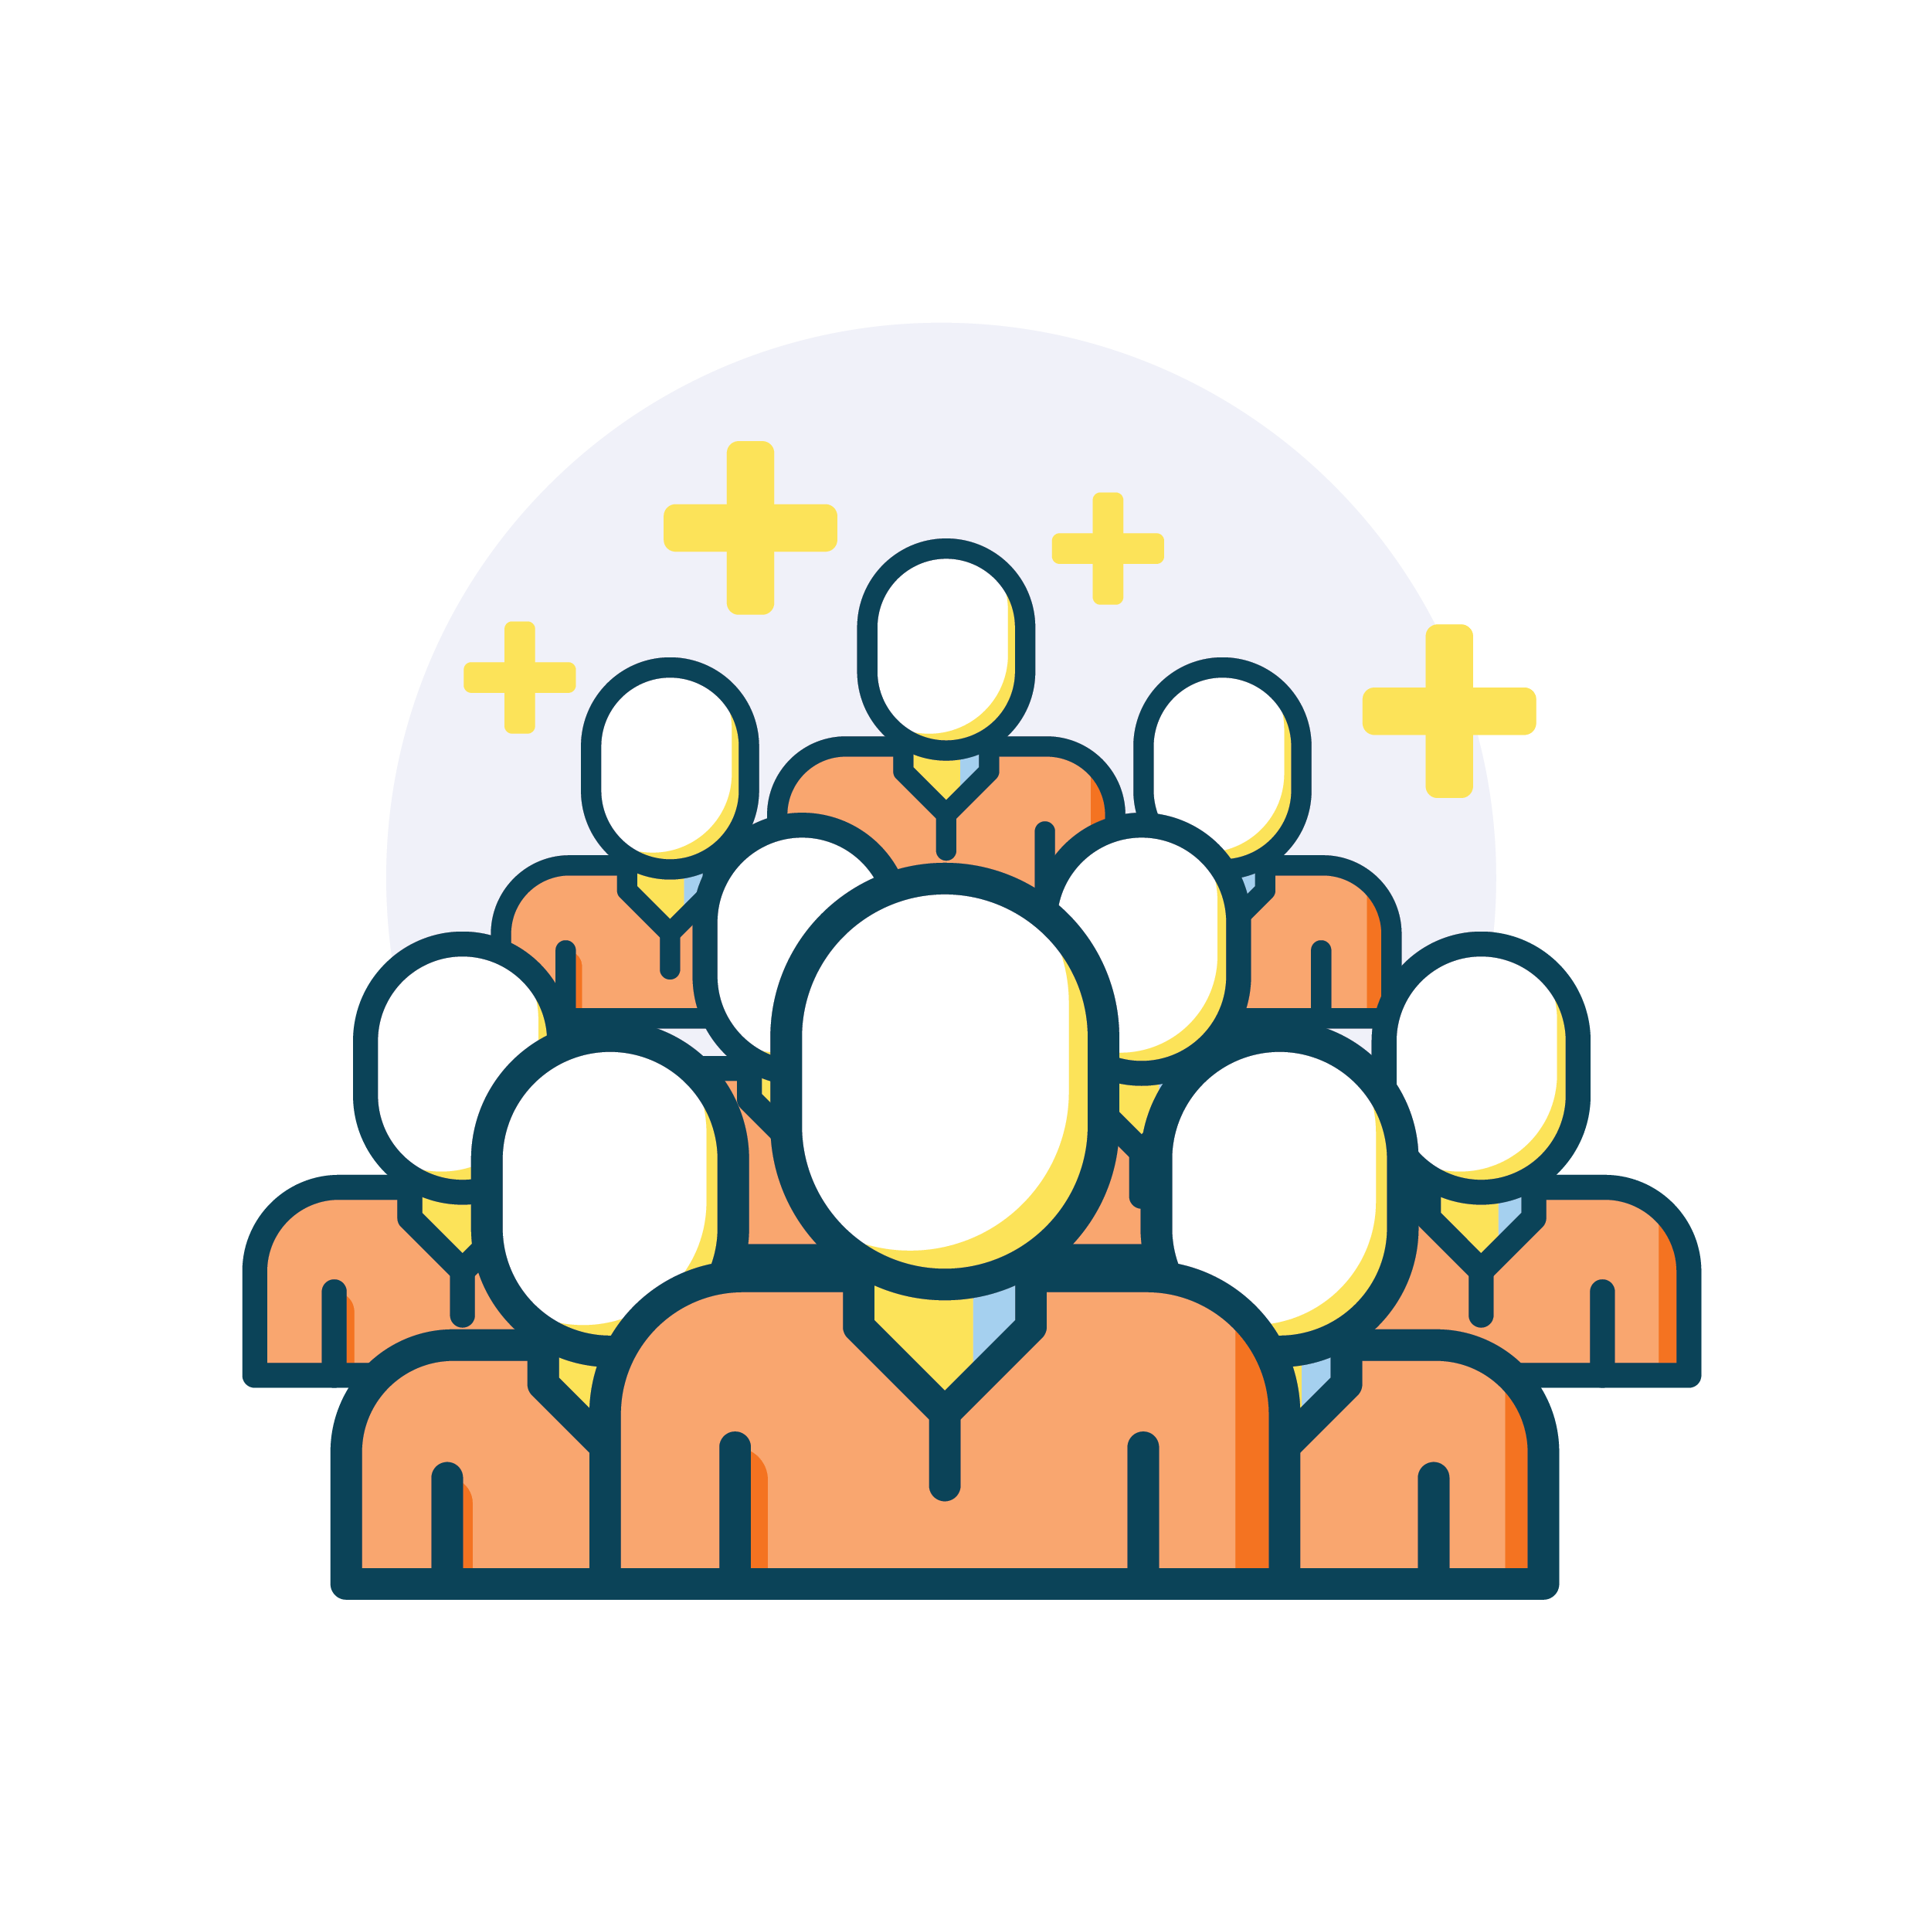 Ideas42_icons_2019_People Reached